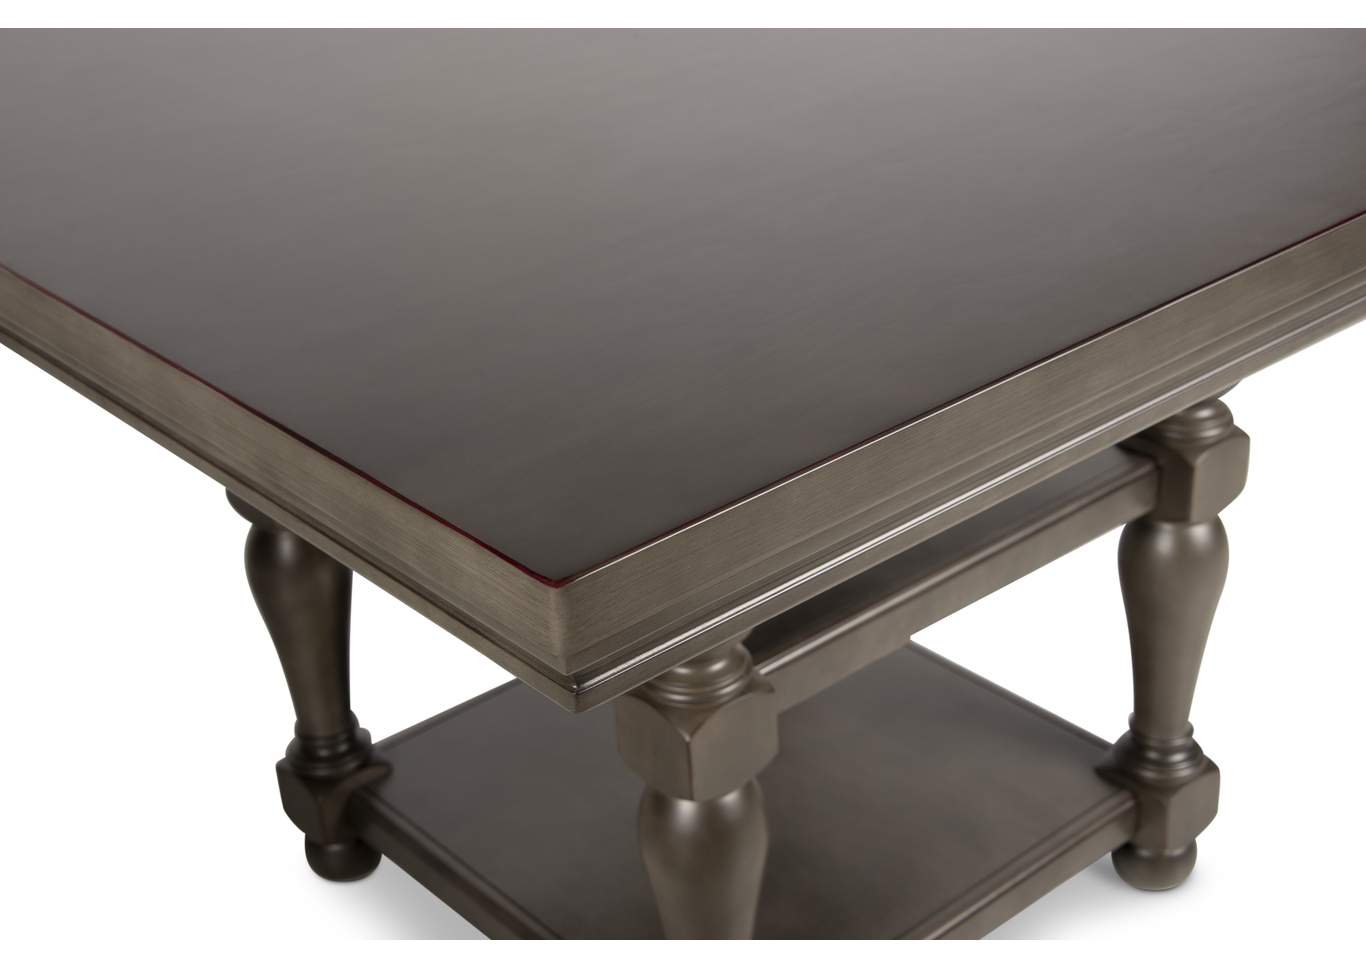 Caswell Grey Counter Dining Table,Steve Silver